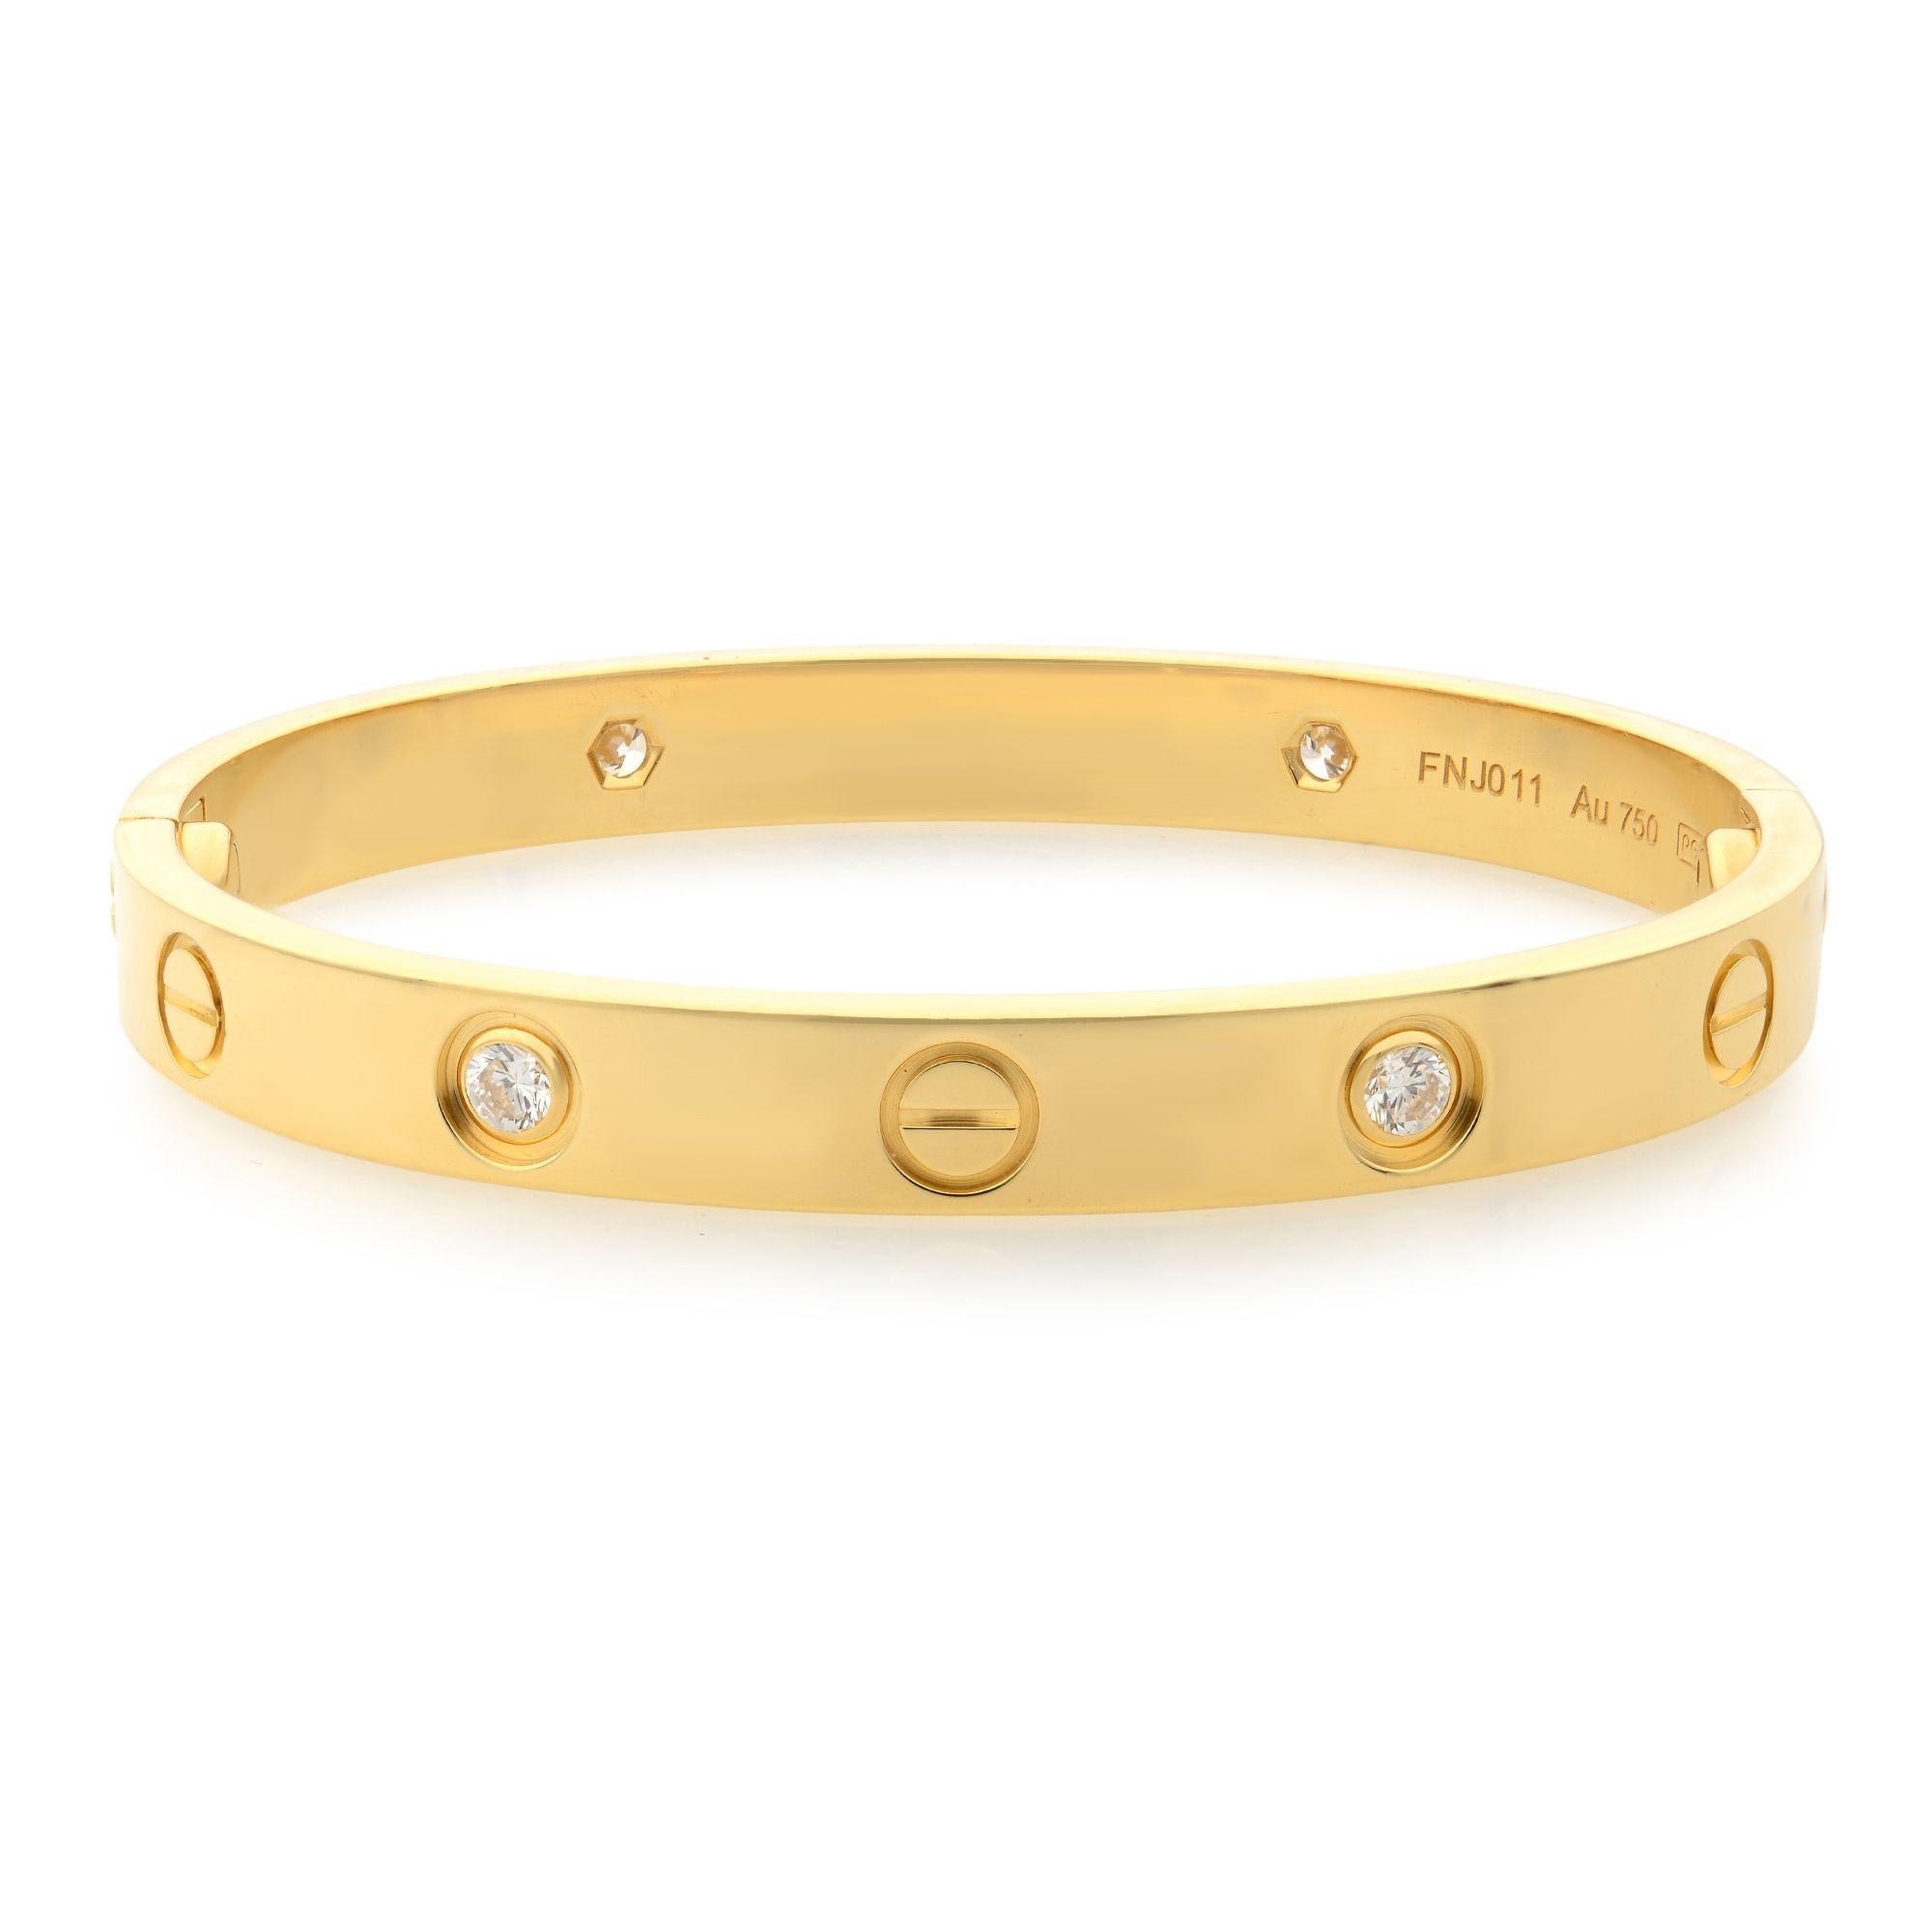 Cartier Love bracelet, 18K yellow gold, set with 4 brilliant-cut diamonds totaling 0.42 carats. Sold with a screwdriver. Width: 6.1mm. Size 15.
Pre-owned, gently used. Come with box and a screw driver. Authenticity papers are not included. 

ABOUT